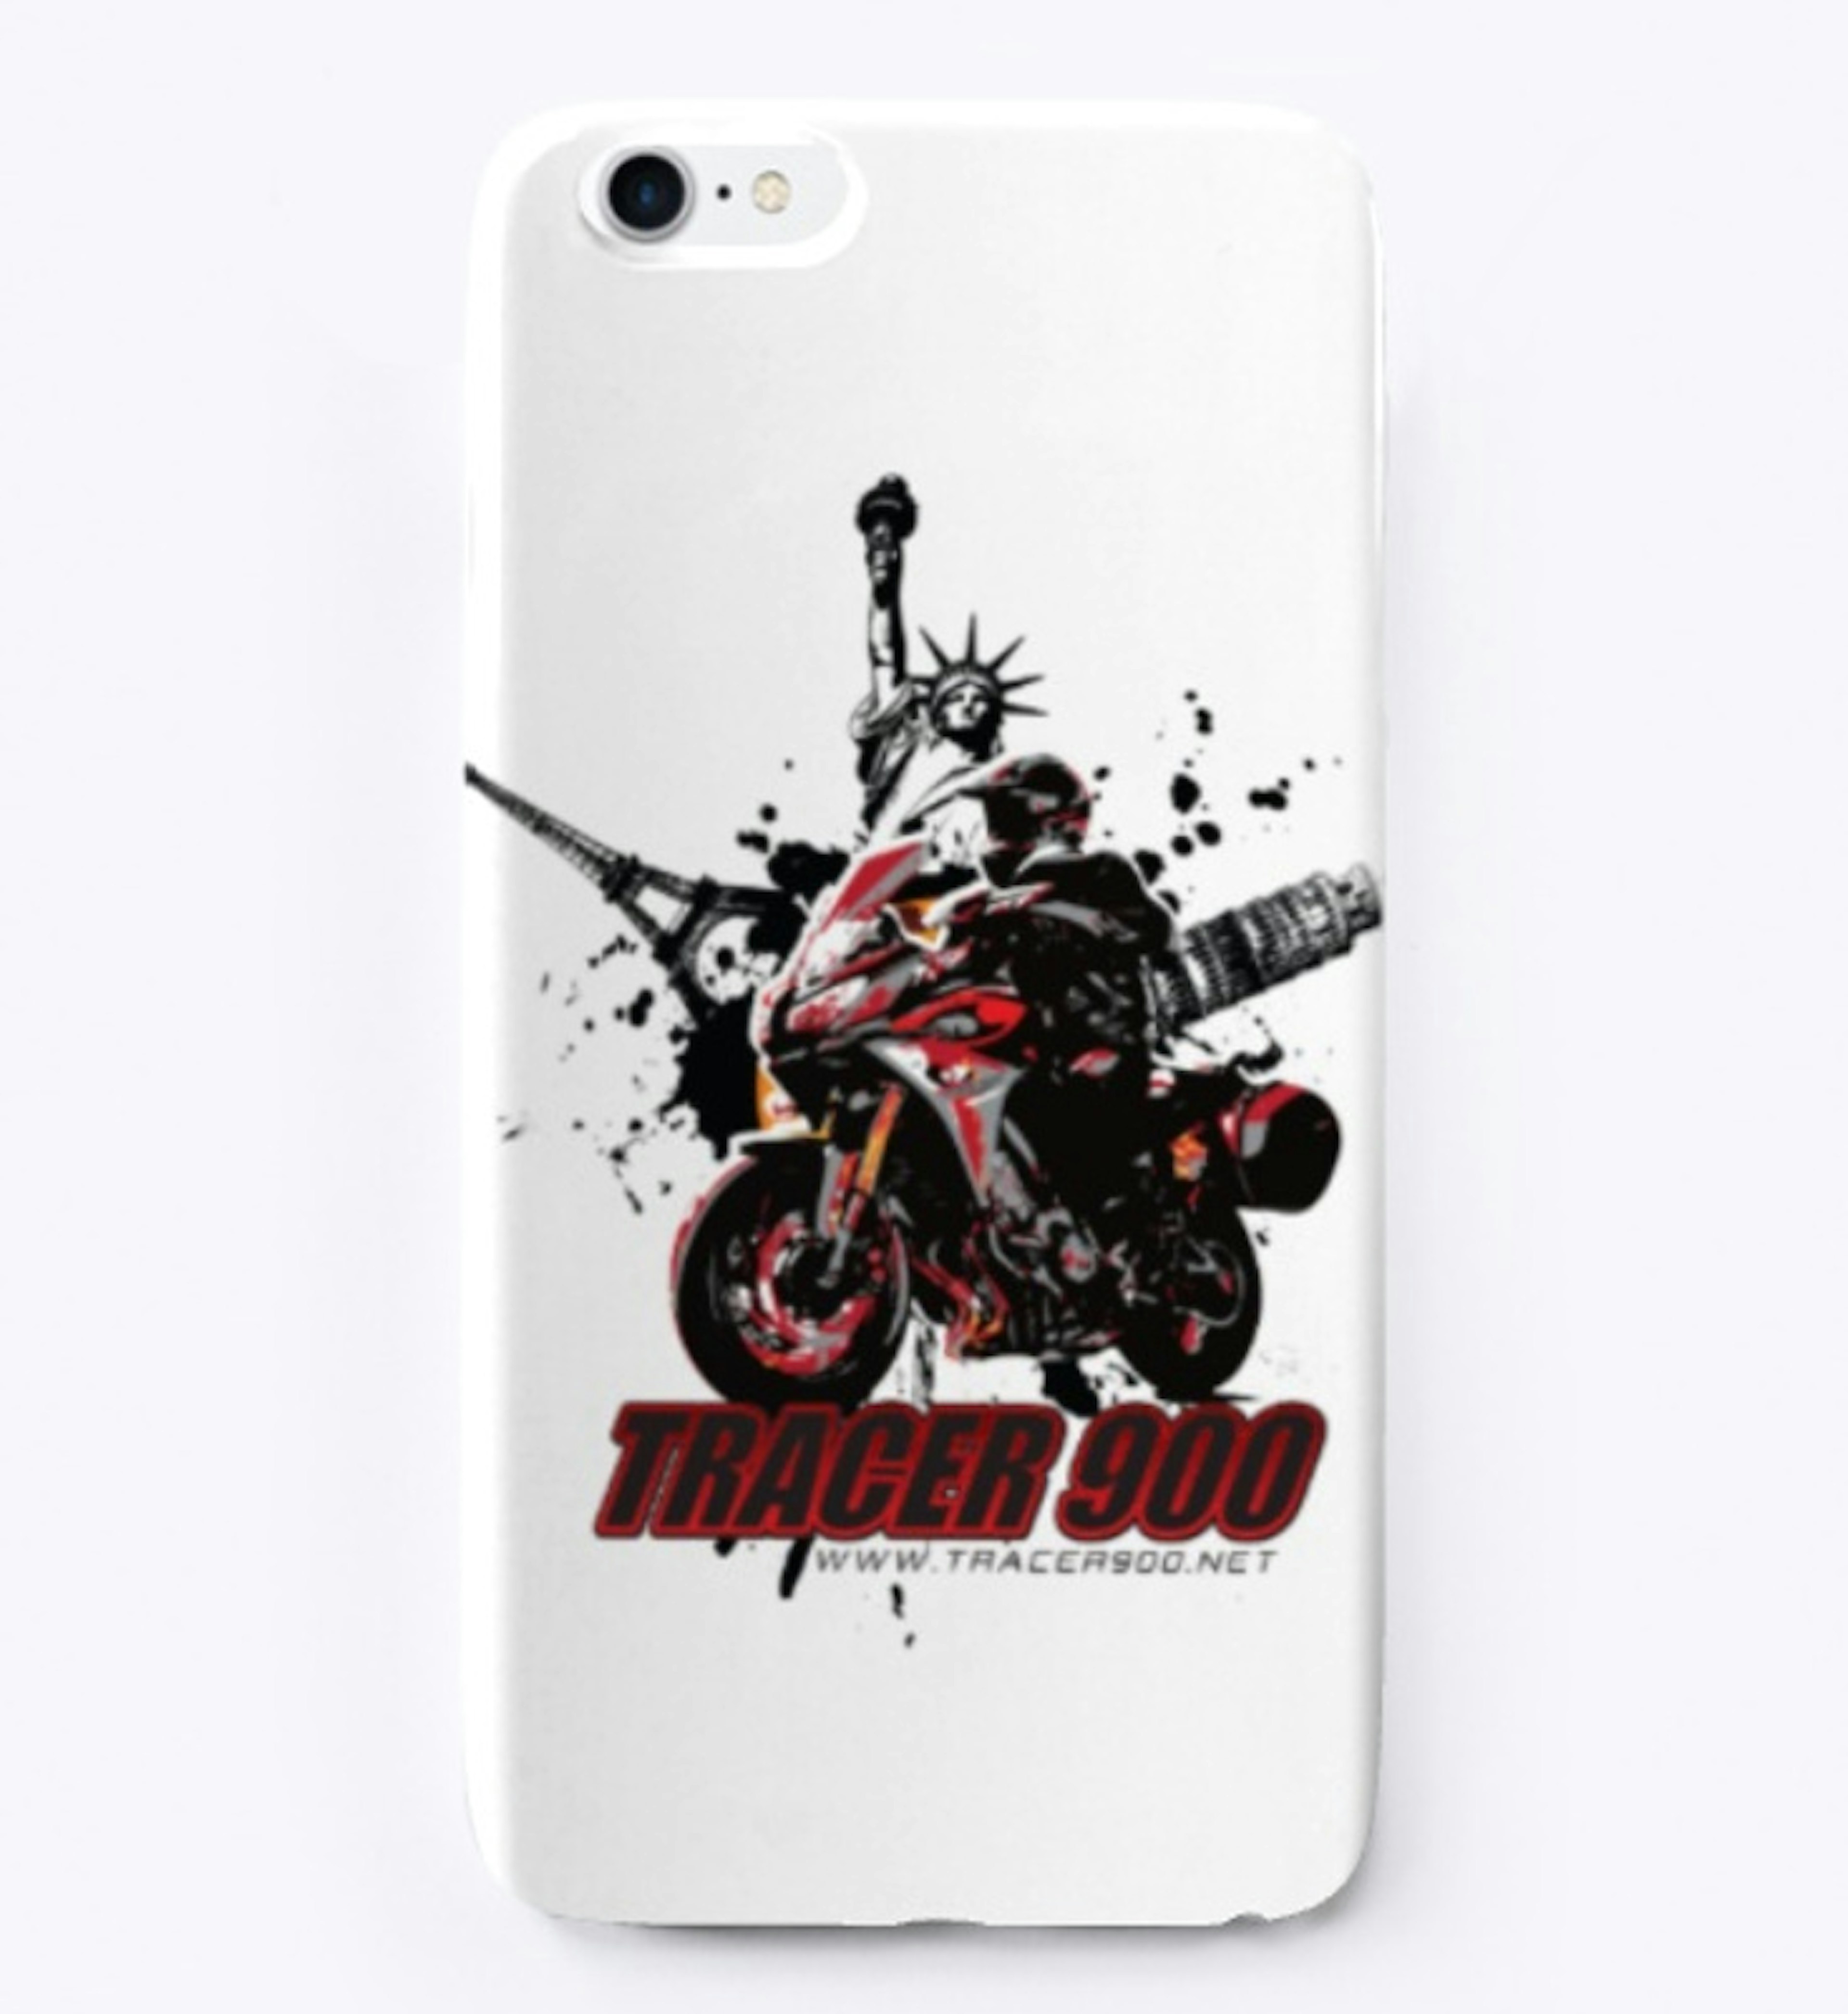 iPhone Red Tracer 900 Phone Case